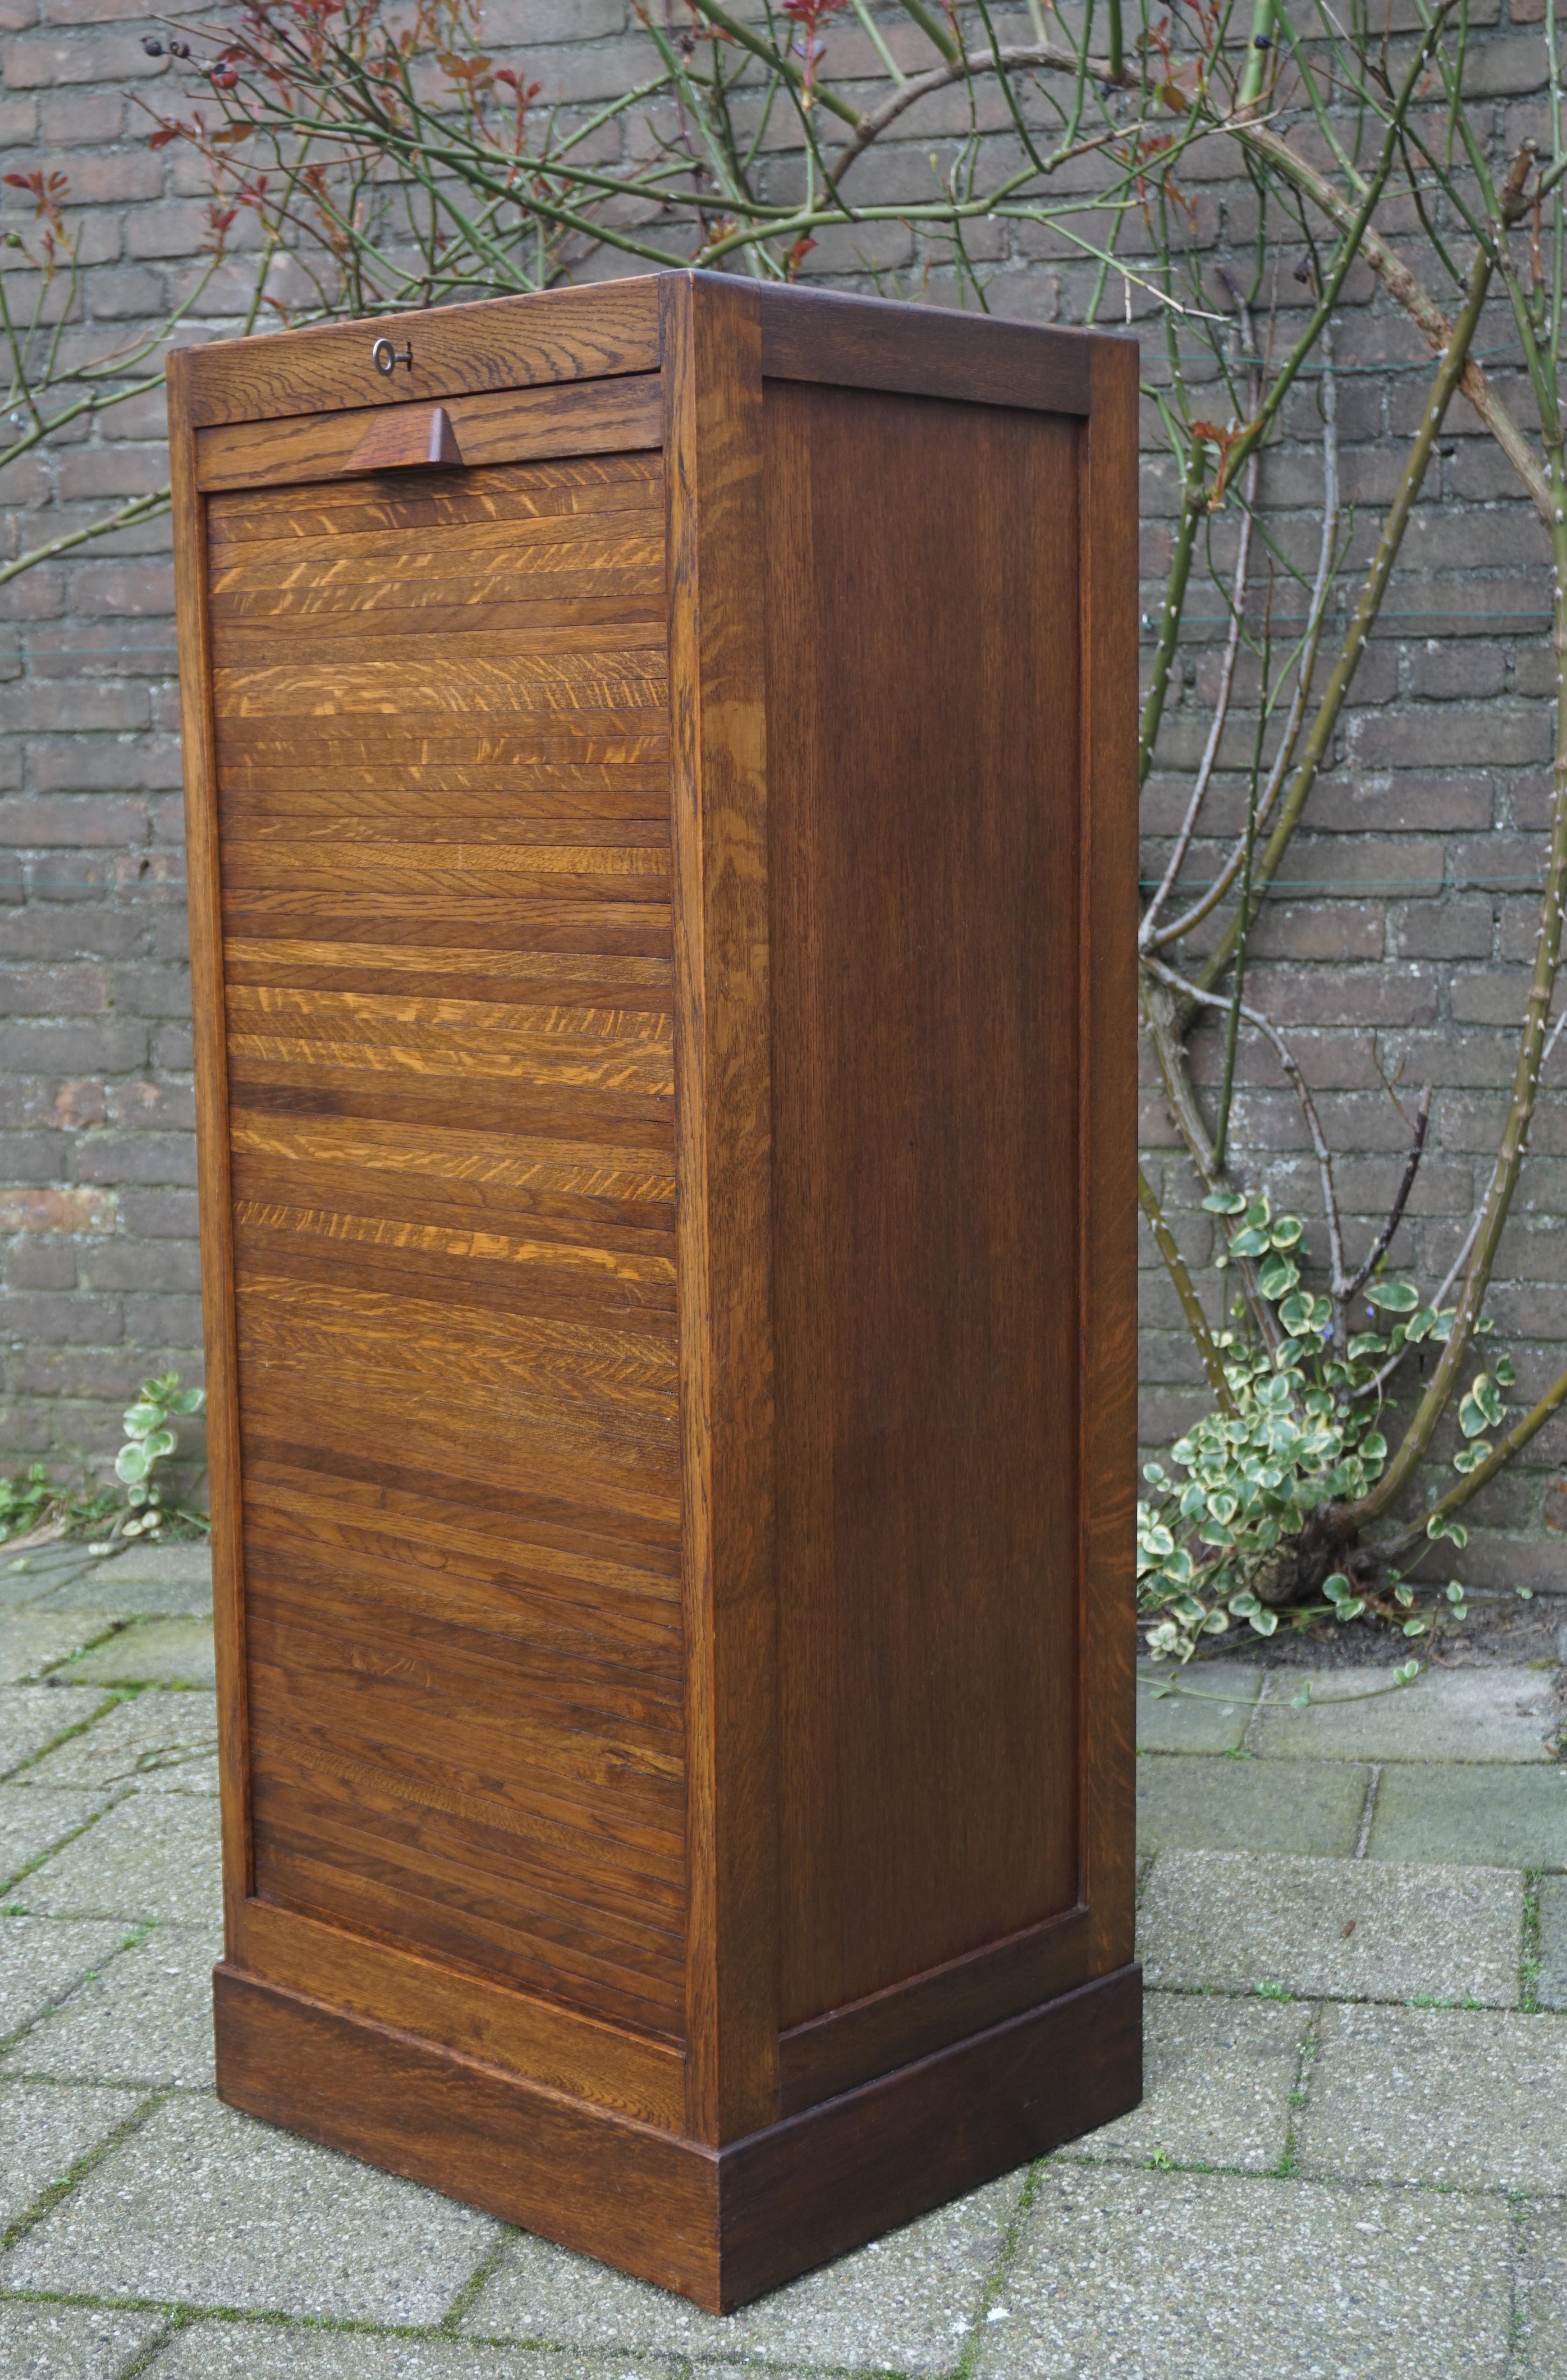 Museum quality and condition, Arts & Crafts era filing cabinet.

This Dutch filing cabinet is another fine example of the quality furniture that was made in the earliest years of the 20th century. The angular design and the warm & wonderful patina